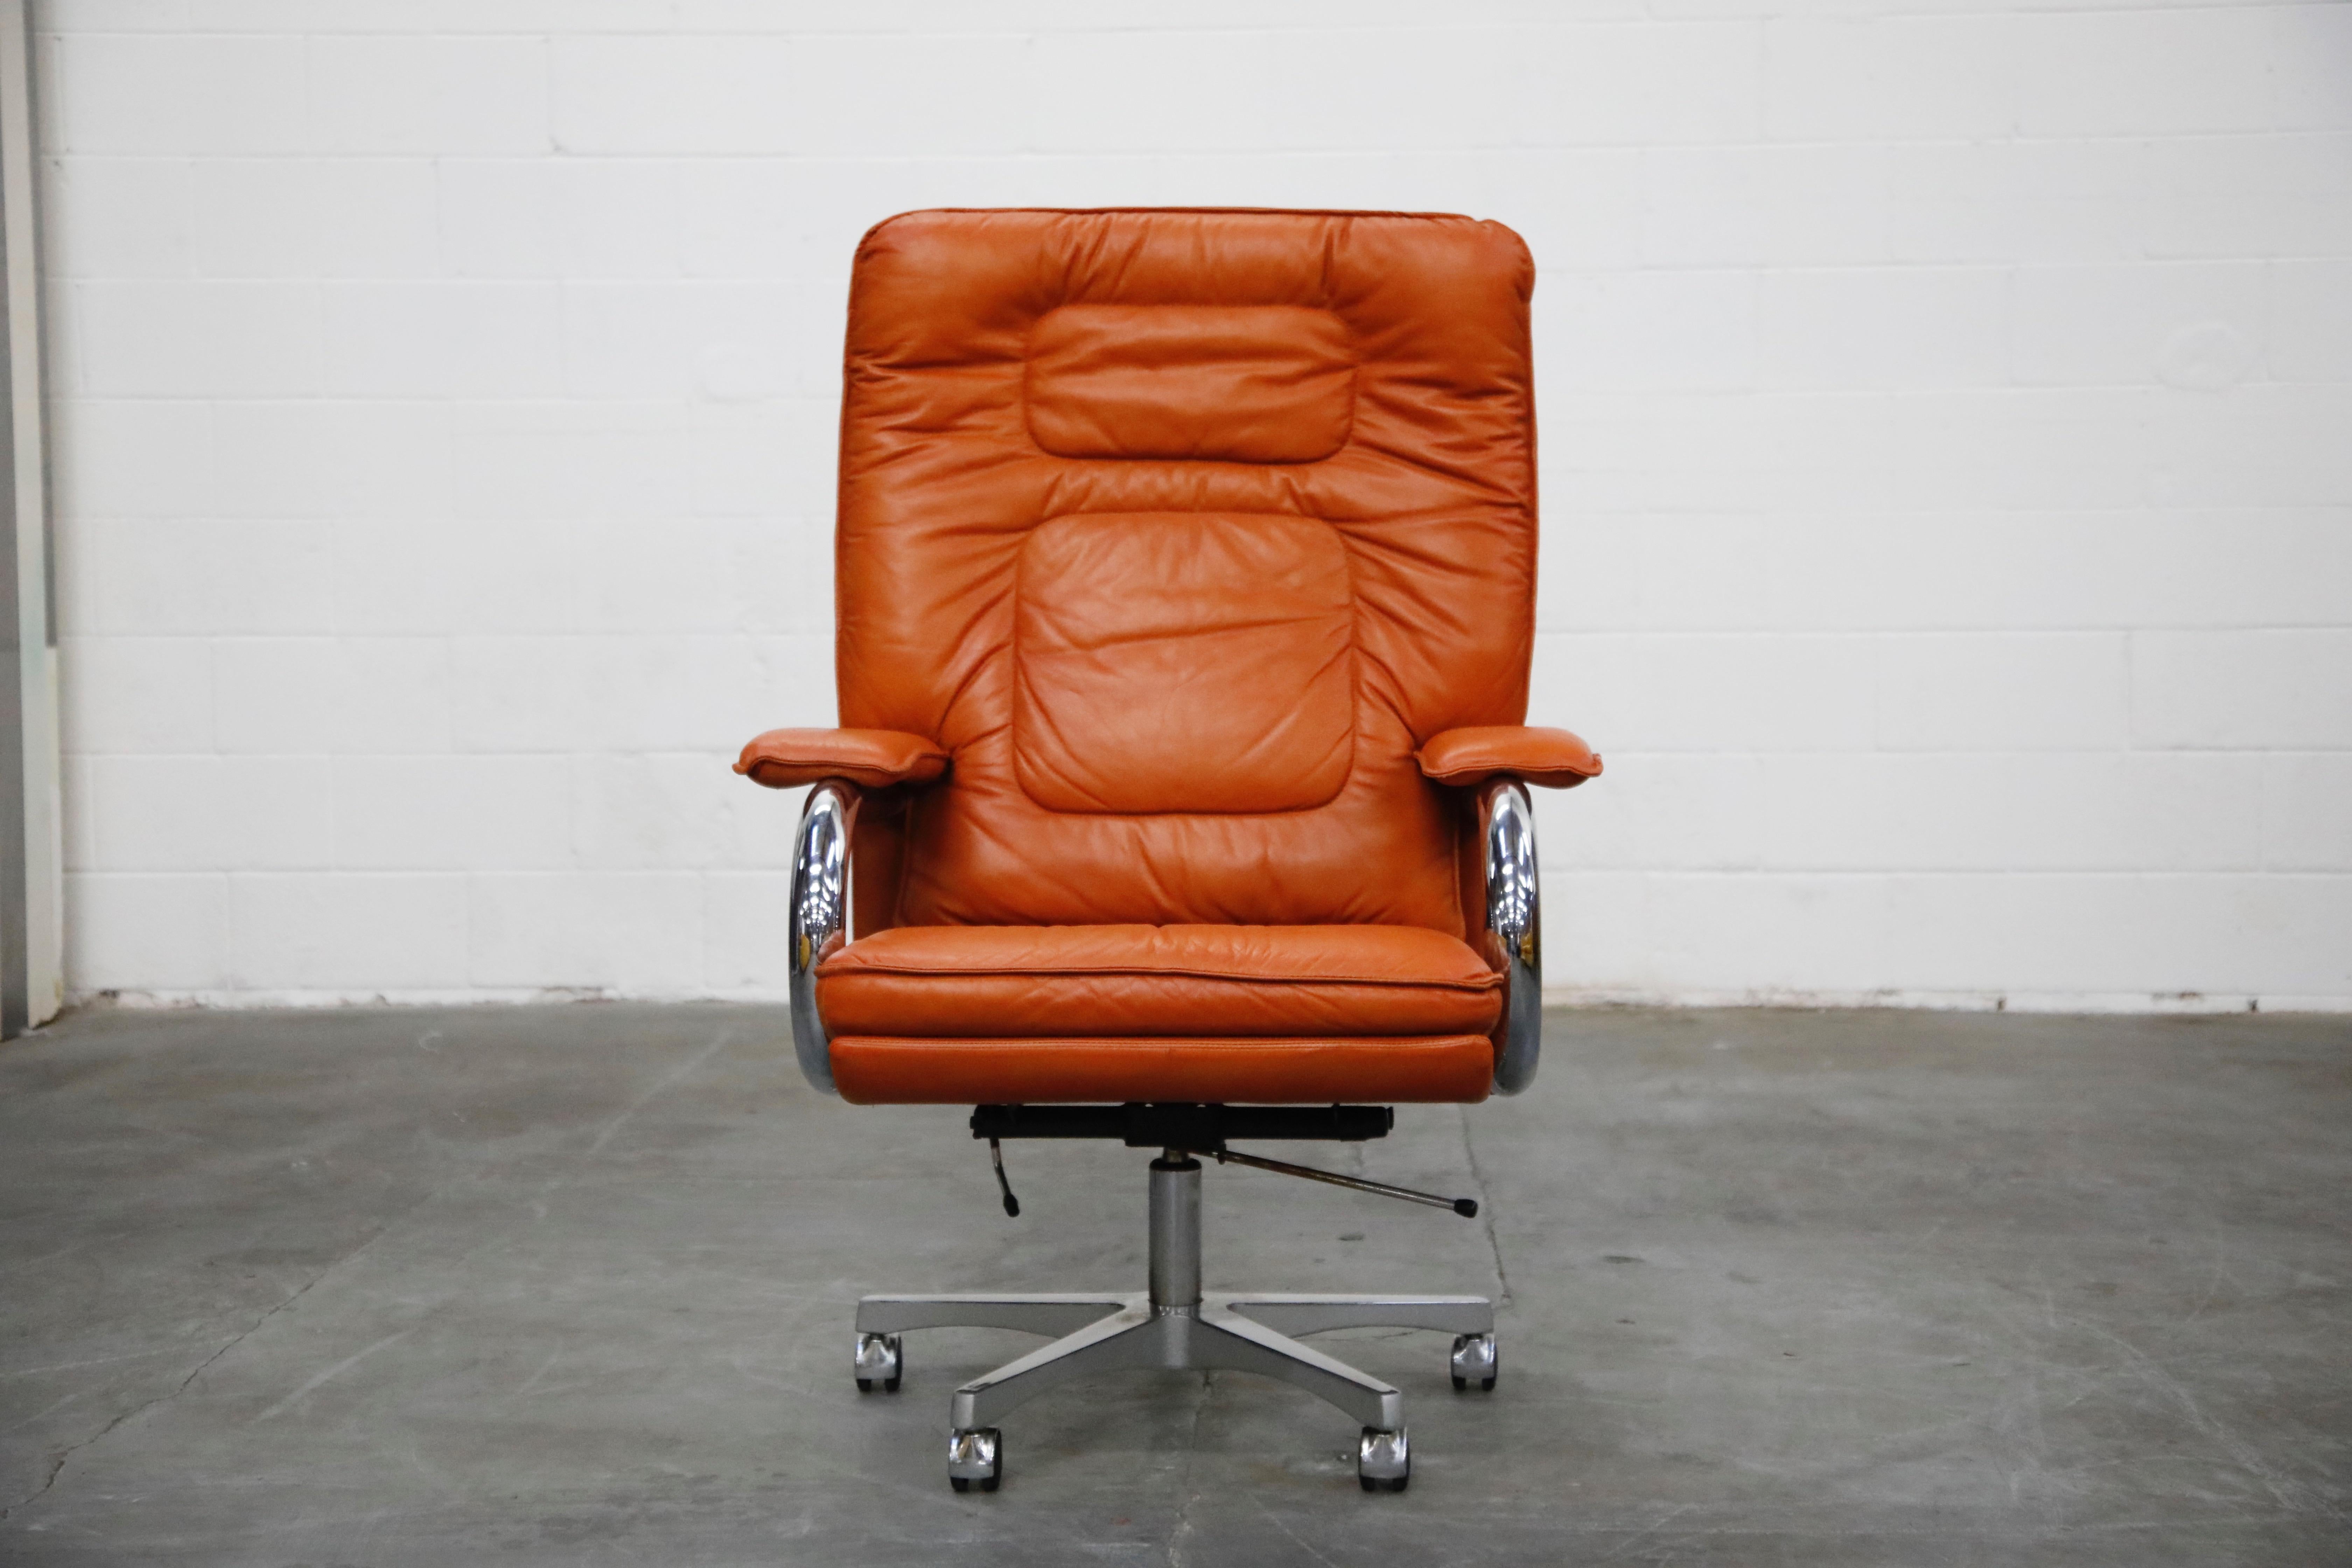 Elegant Guido Faleschini high back executive swivel desk chair by i4 Mariani for The Pace Collection. The seat and back retain the original high-quality and supple cognac / caramel color leather upholstery. The cushioned seat sits atop of a five